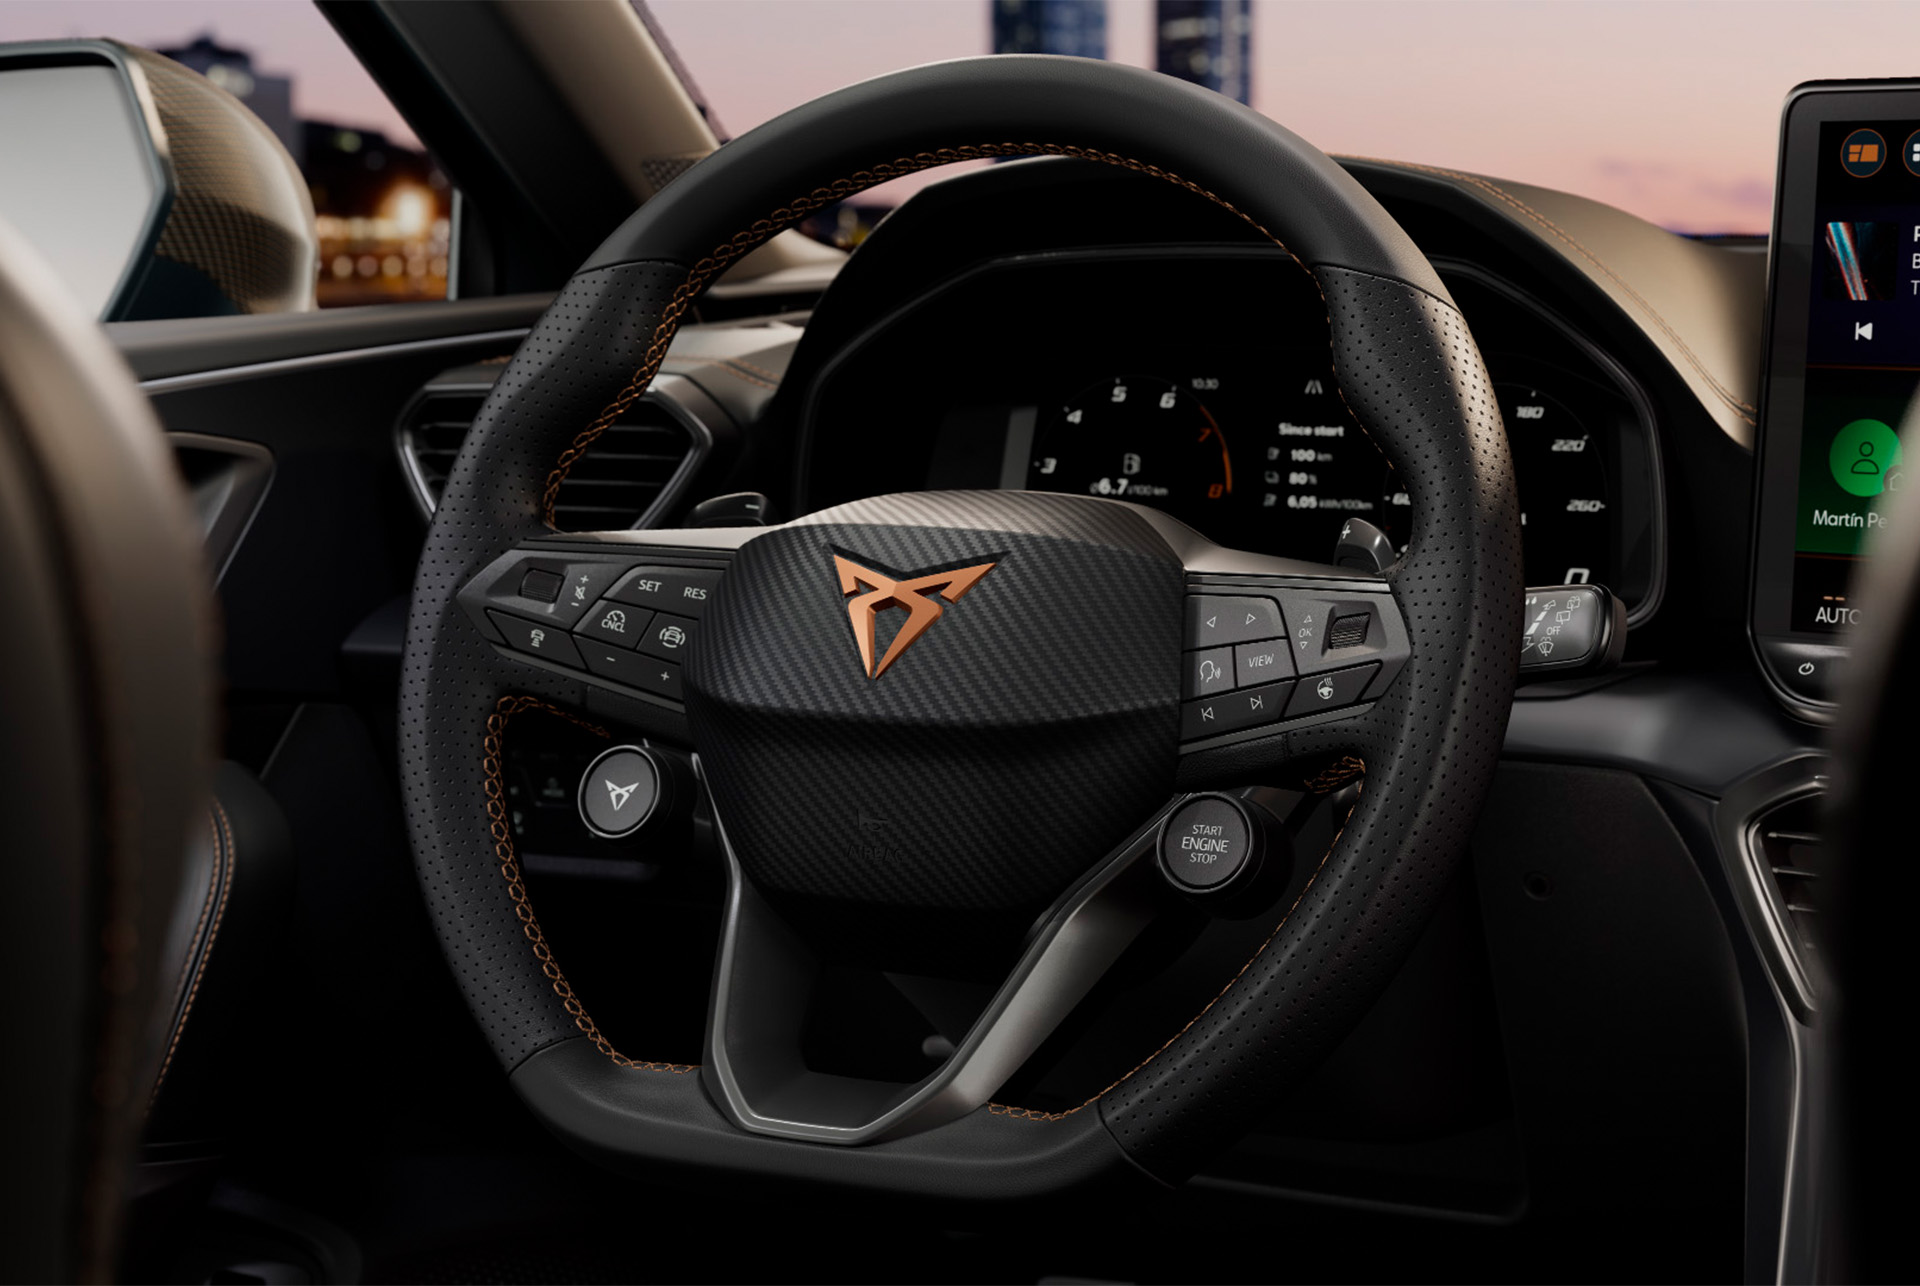 new cupra leon sportstourer 2024, steering wheel with satelite controls,  safety tech advanced assistance systems, adaptive cruise control, lane keeping and live dynamic road sign display.